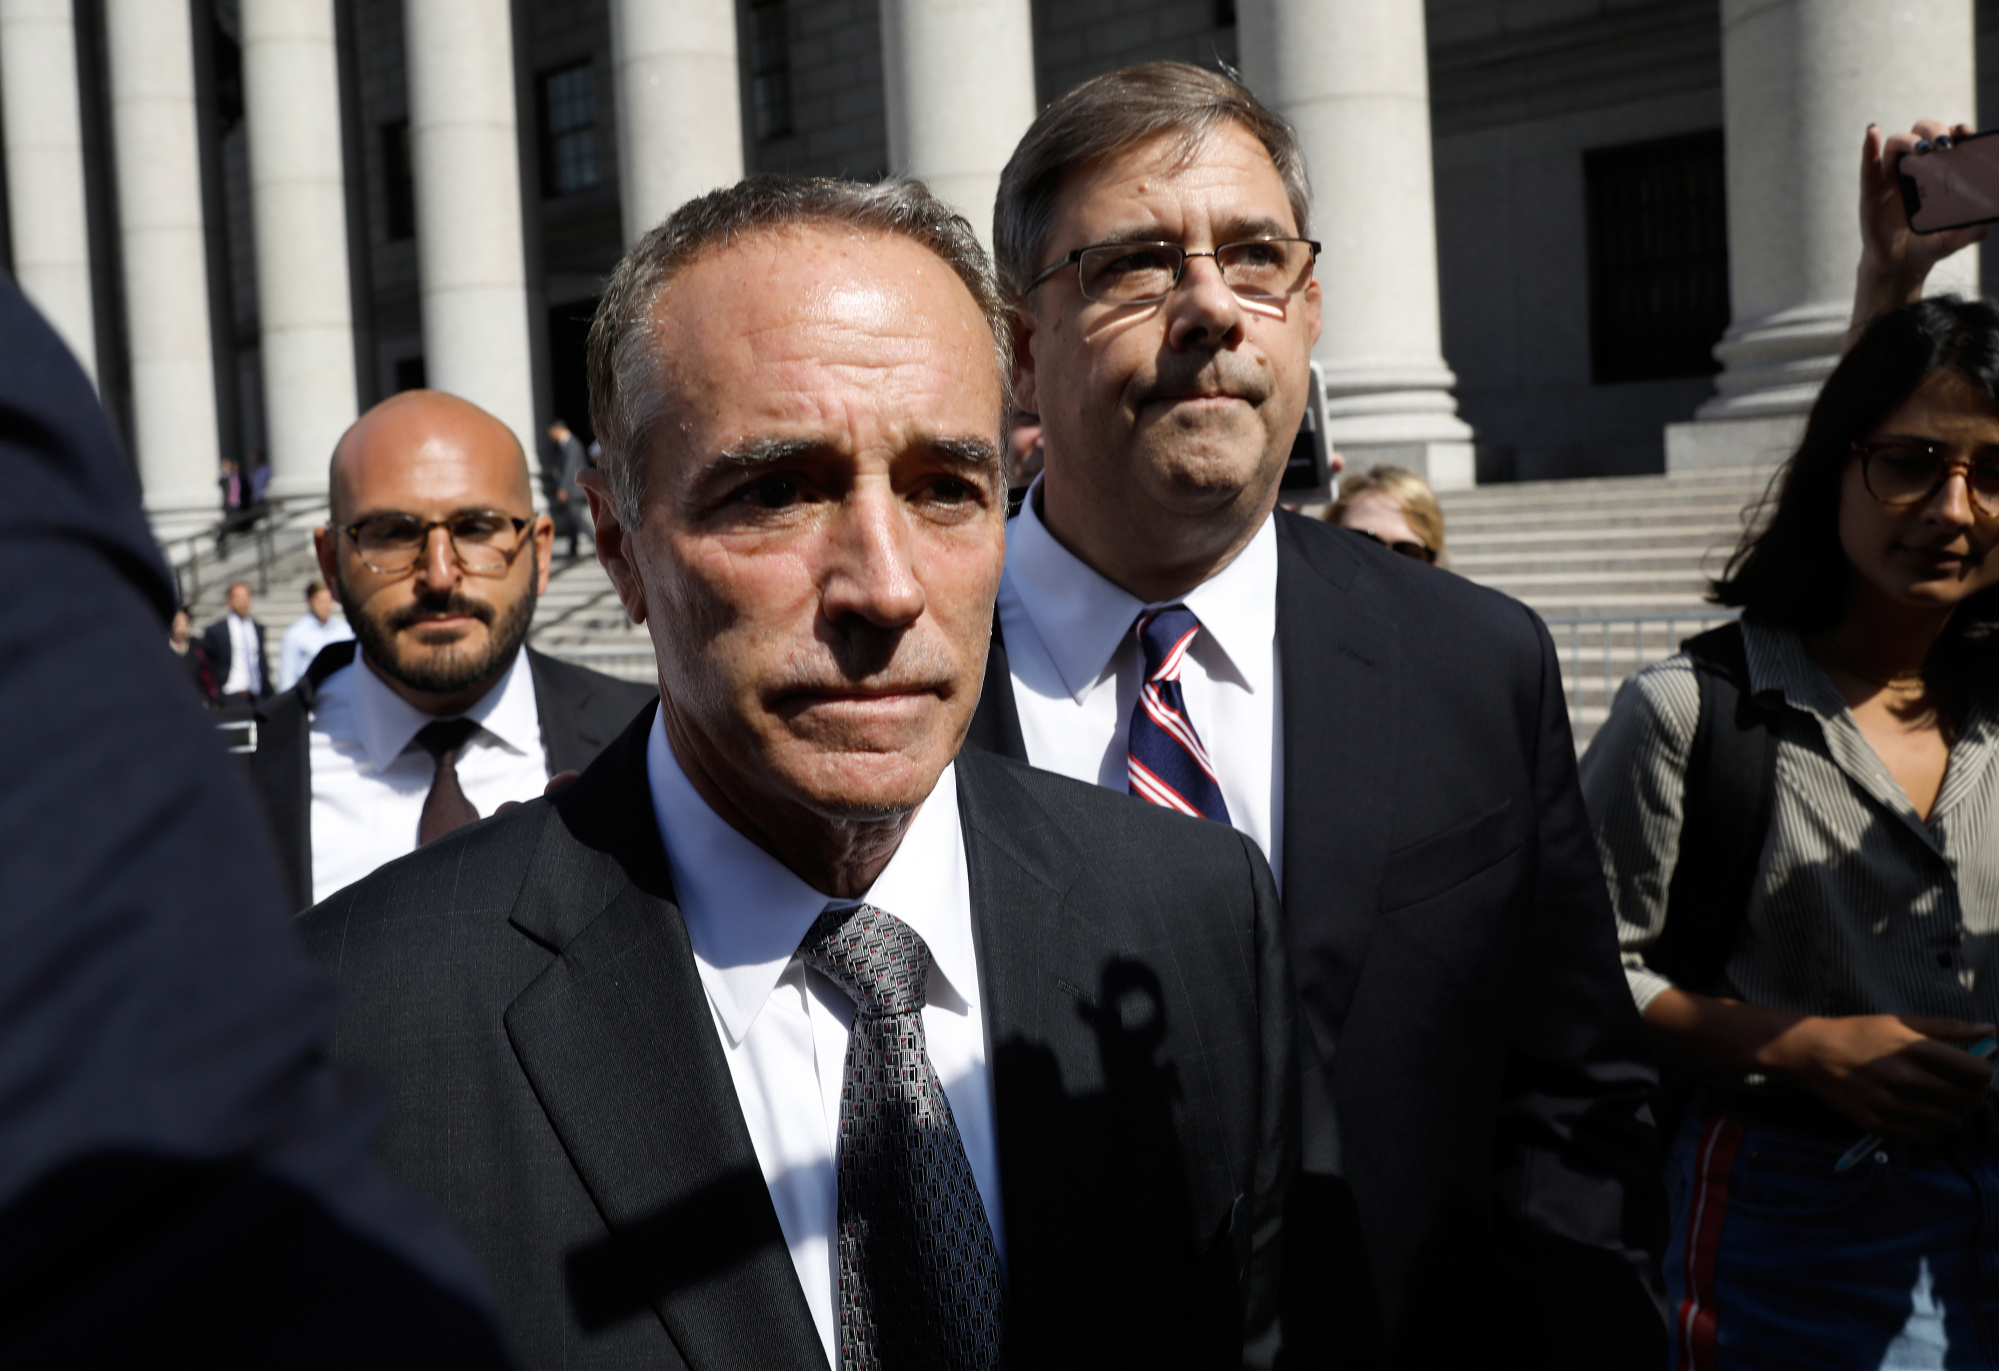 Chris Collins exits federal court in New York on Aug. 8, 2018.